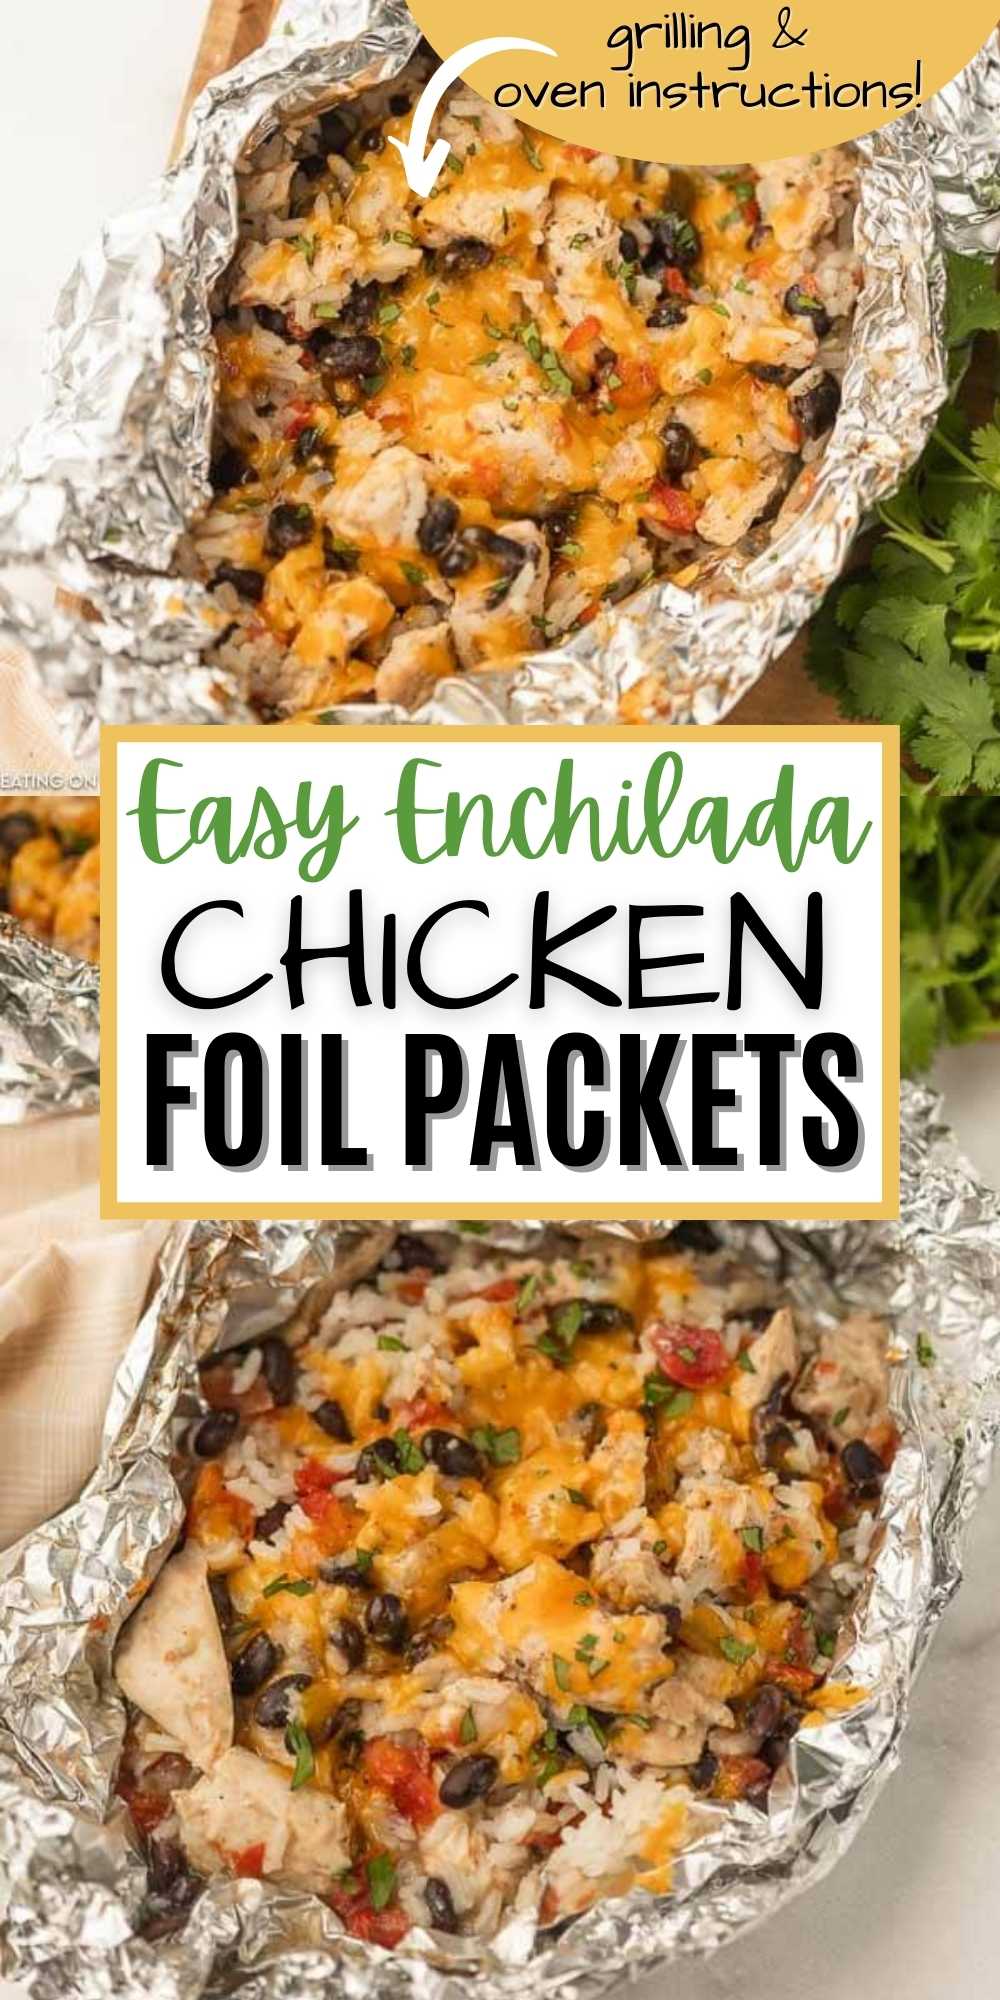 This easy chicken enchilada foil packet meal will be a hit with the entire family! Easy chicken enchilada foil dinner is packed with yummy chicken, cheese, beans and more! Try Easy chicken enchilada foil packet recipe. Cleanup is a breeze too!  #eatingonadime #grillingrecipes #mexicanrecipes #chickenrecipes 
